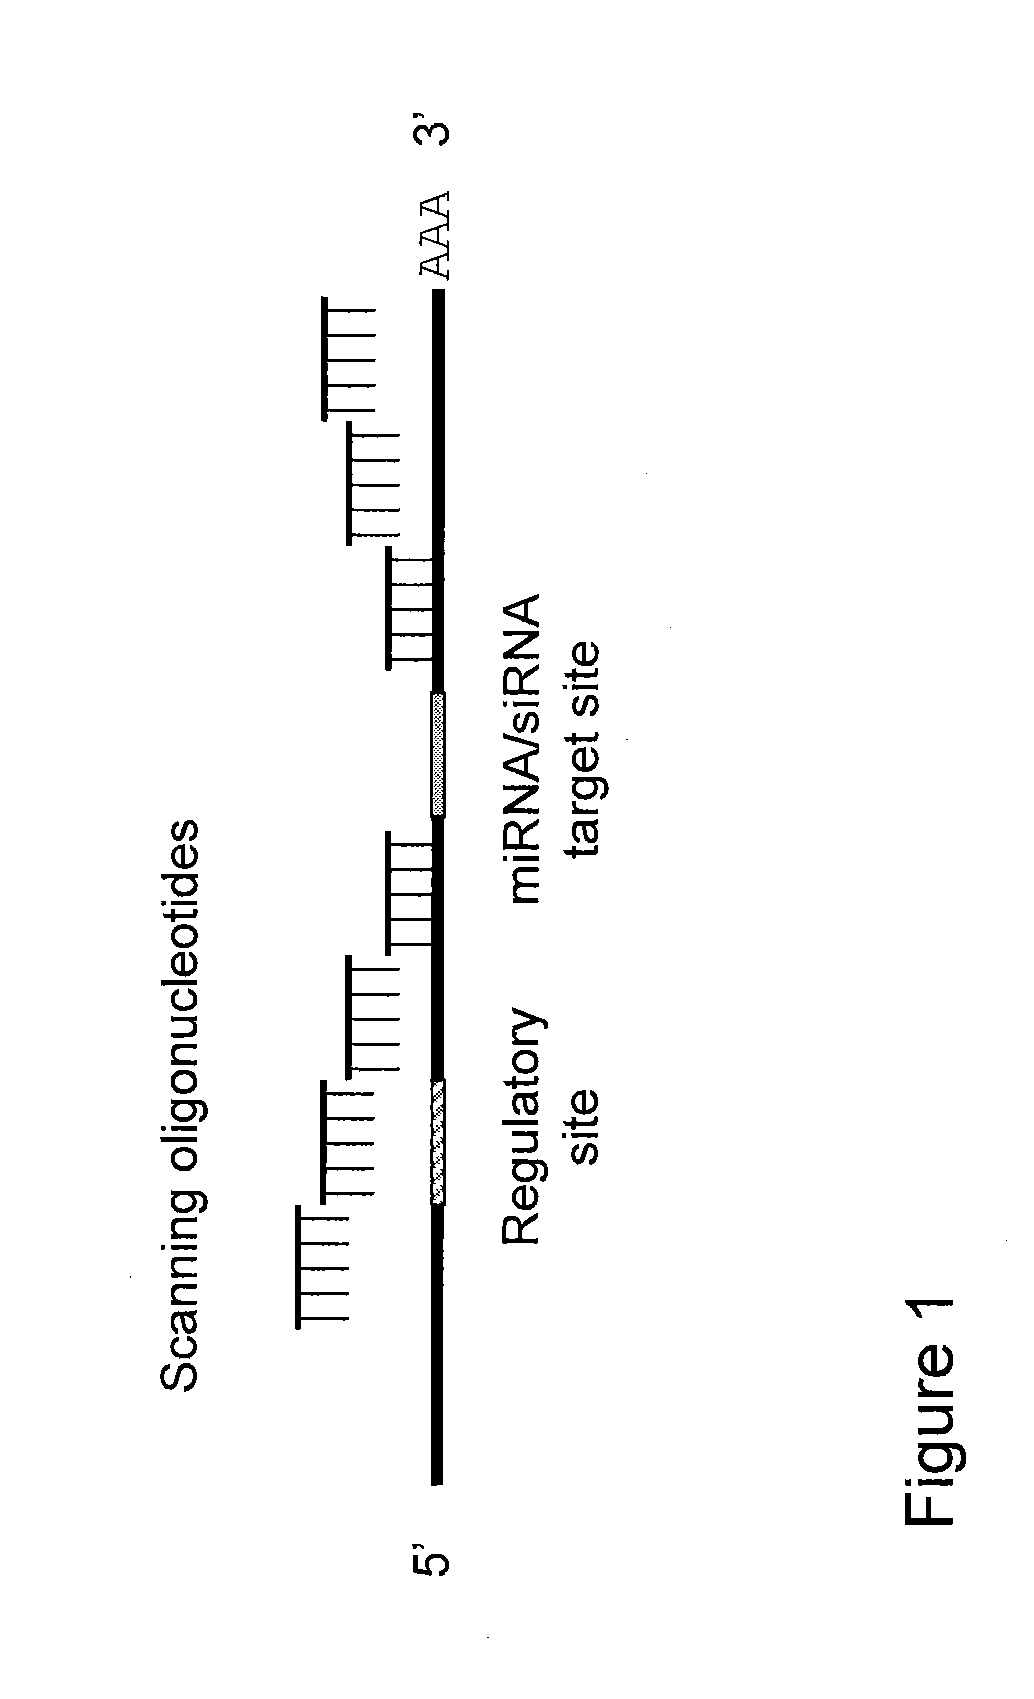 Blocking oligos for inhibition of microrna and sirna activity and uses thereof